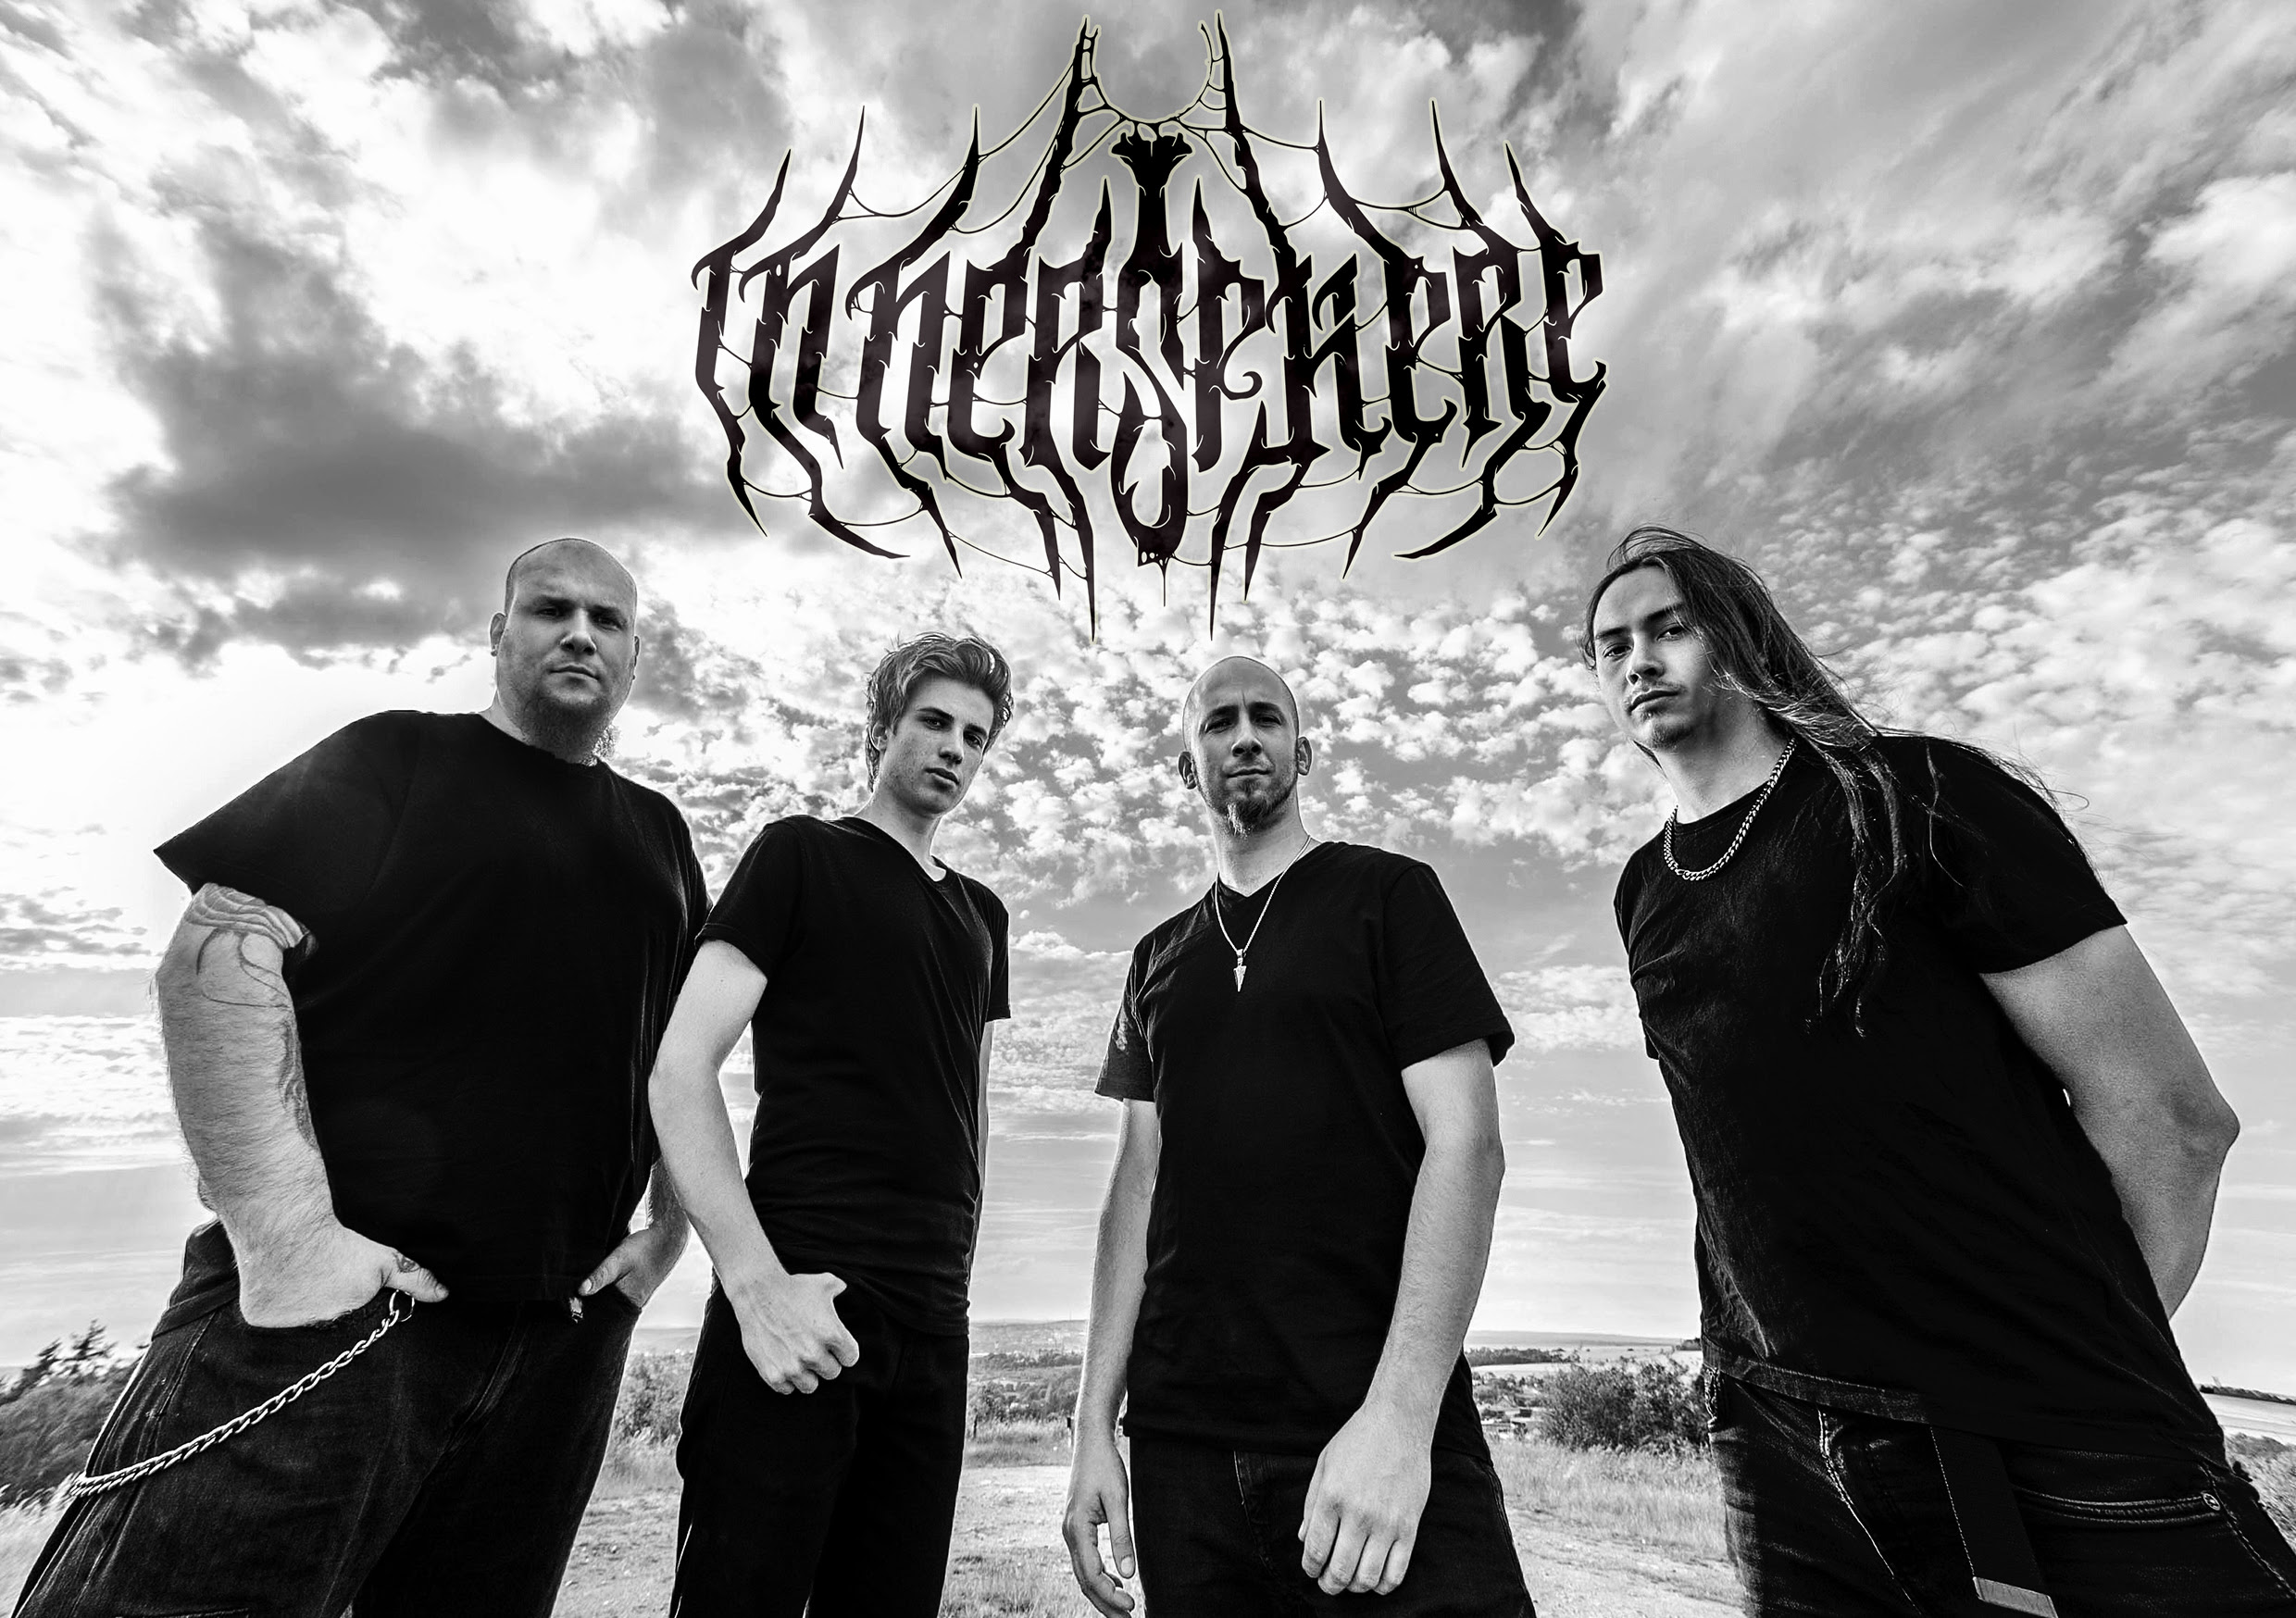 INNERSPHERE released a new video for their song “Fire”.